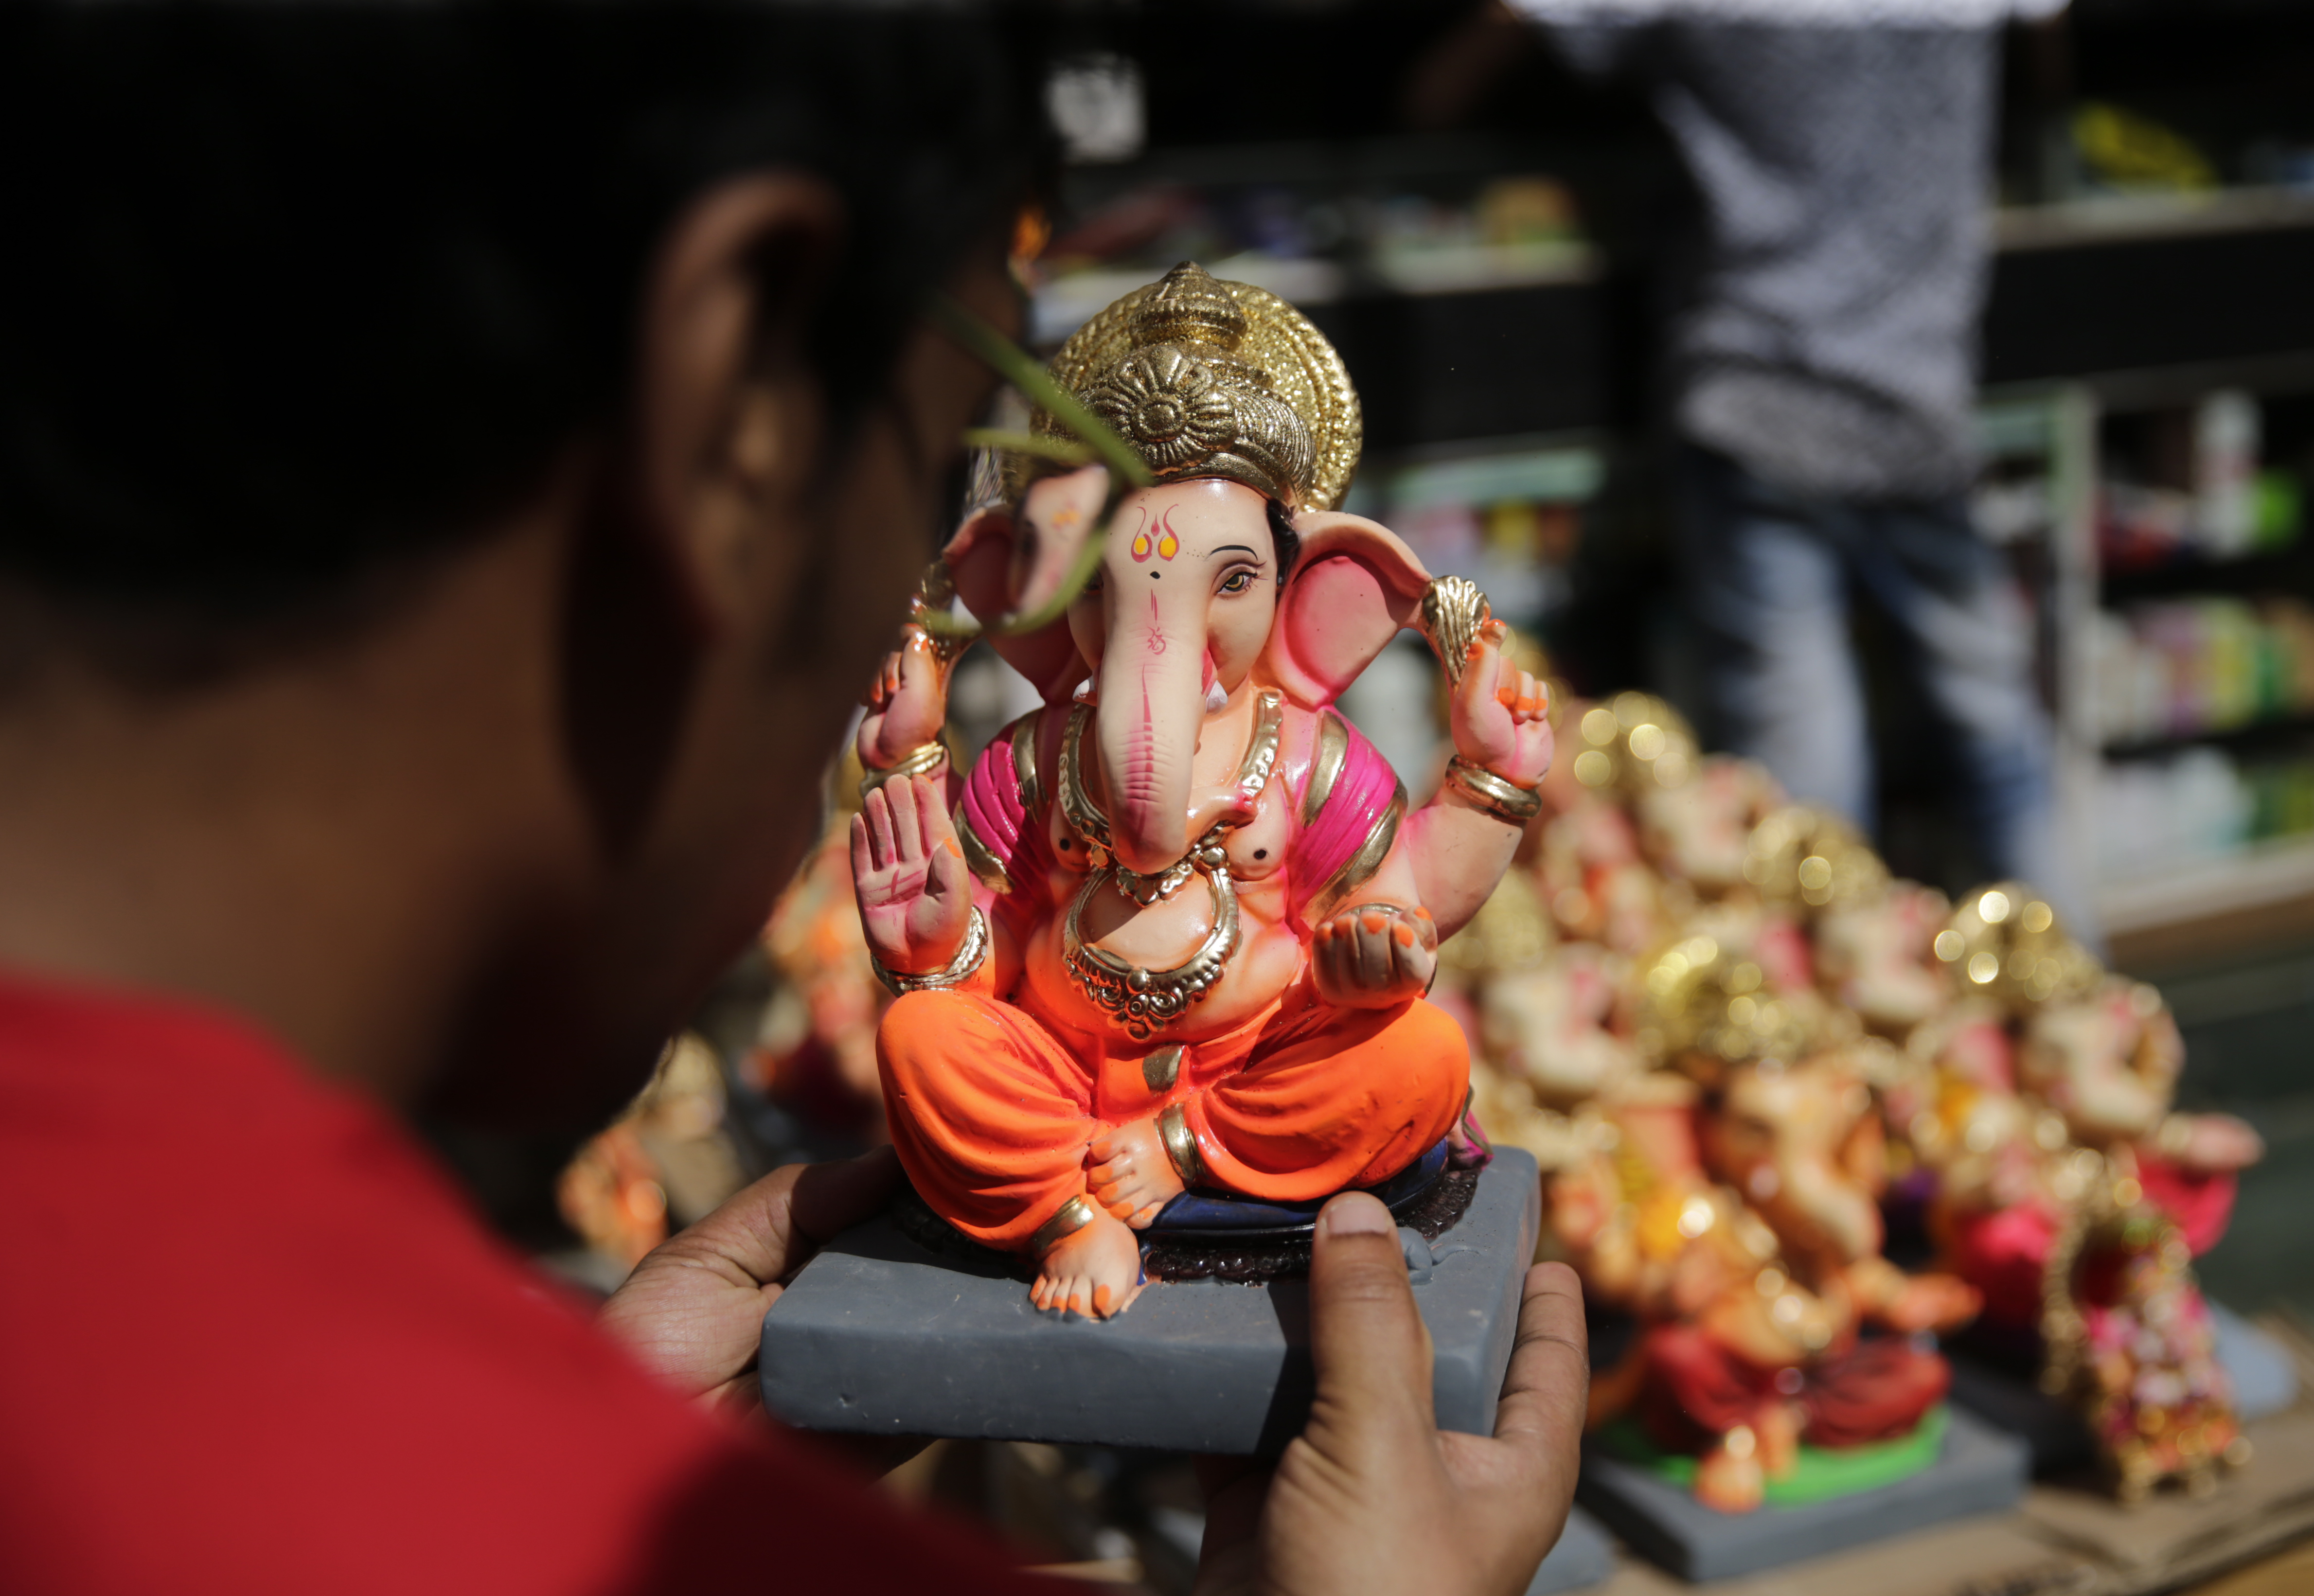 A devotee looks at an idol of elephant-headed Hindu god Ganesha displayed for sale at a worship during Ganesh Chaturthi festival celebrations in Mumbai - AP